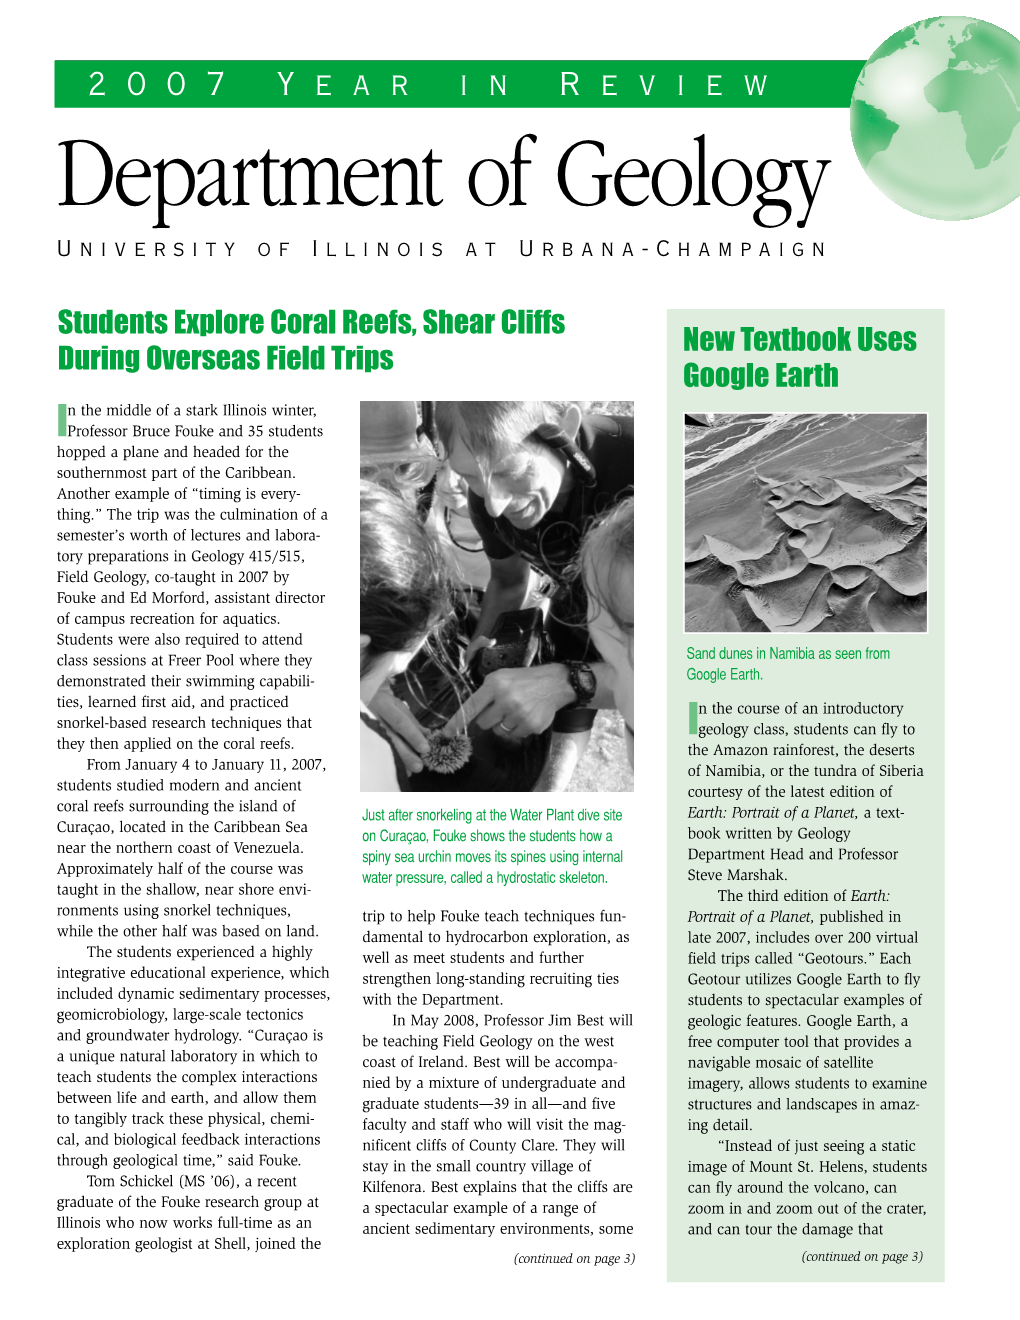 Department of Geology University of Illinois at Urbana-Champaign